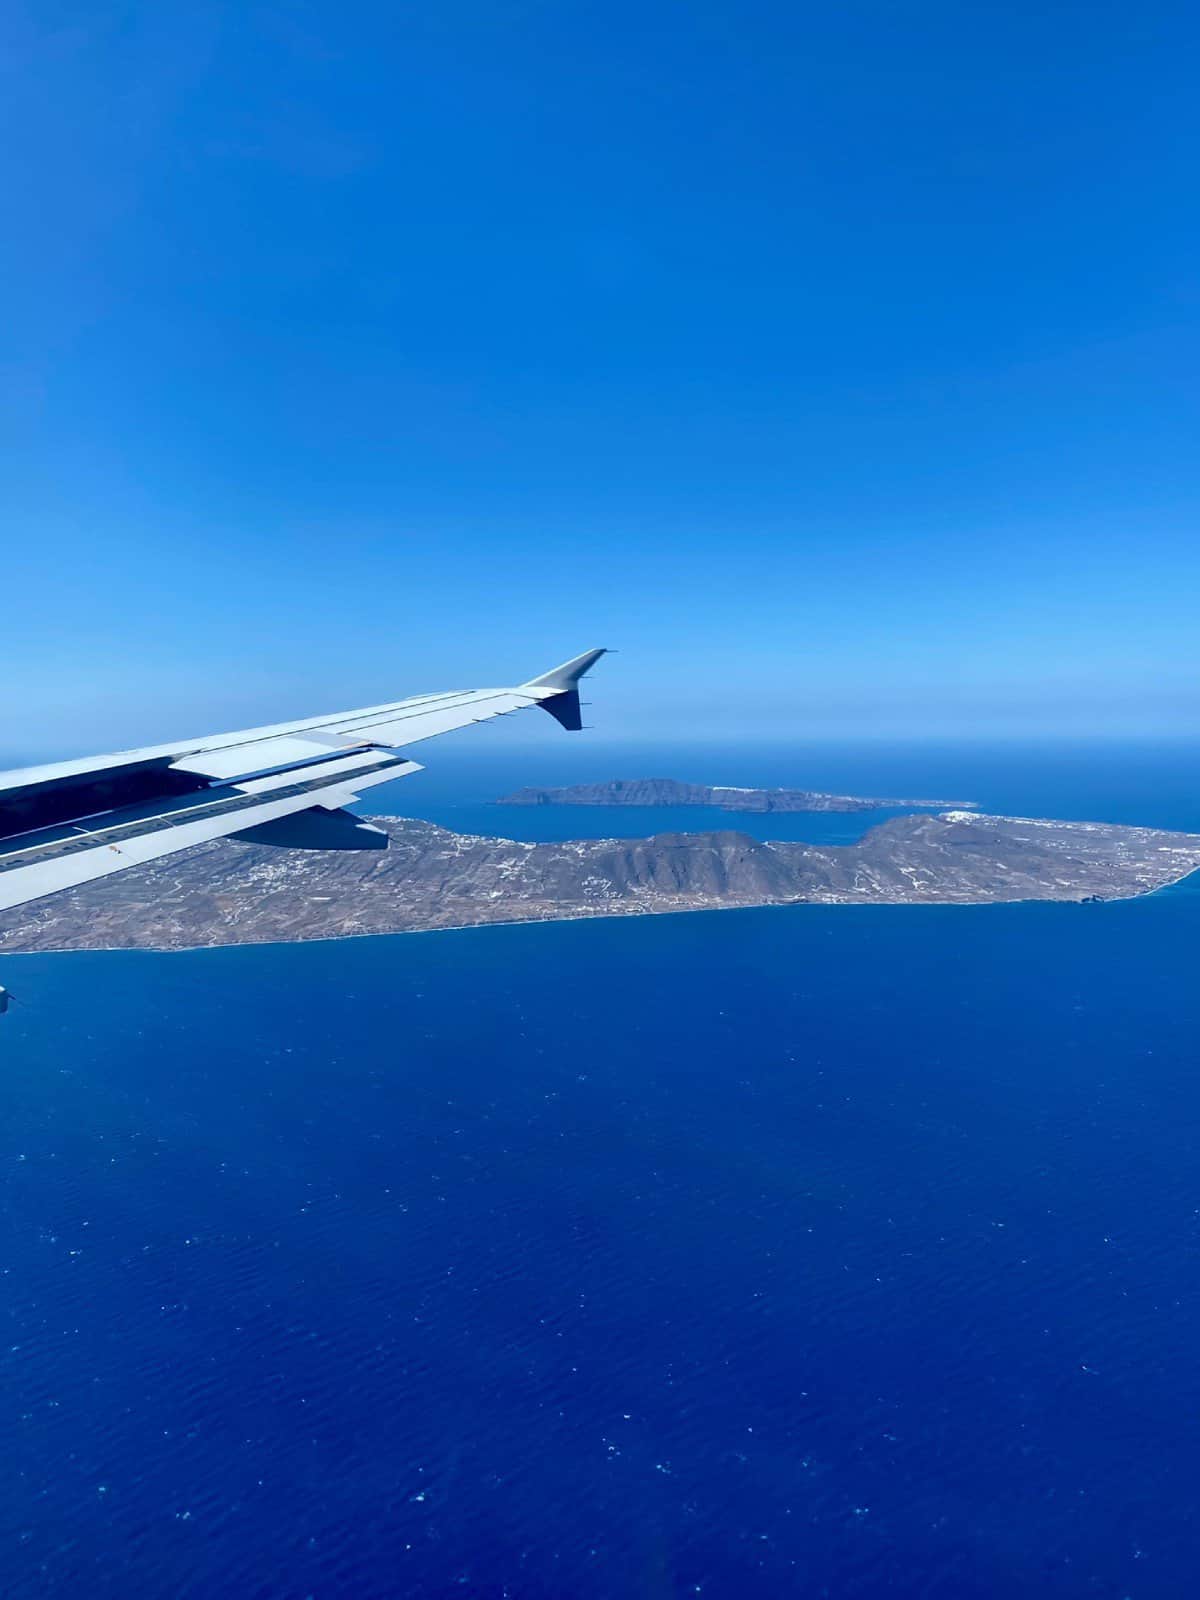 A birds-eye view of Santorini, including the famous Fira to Oia hike on the ridge